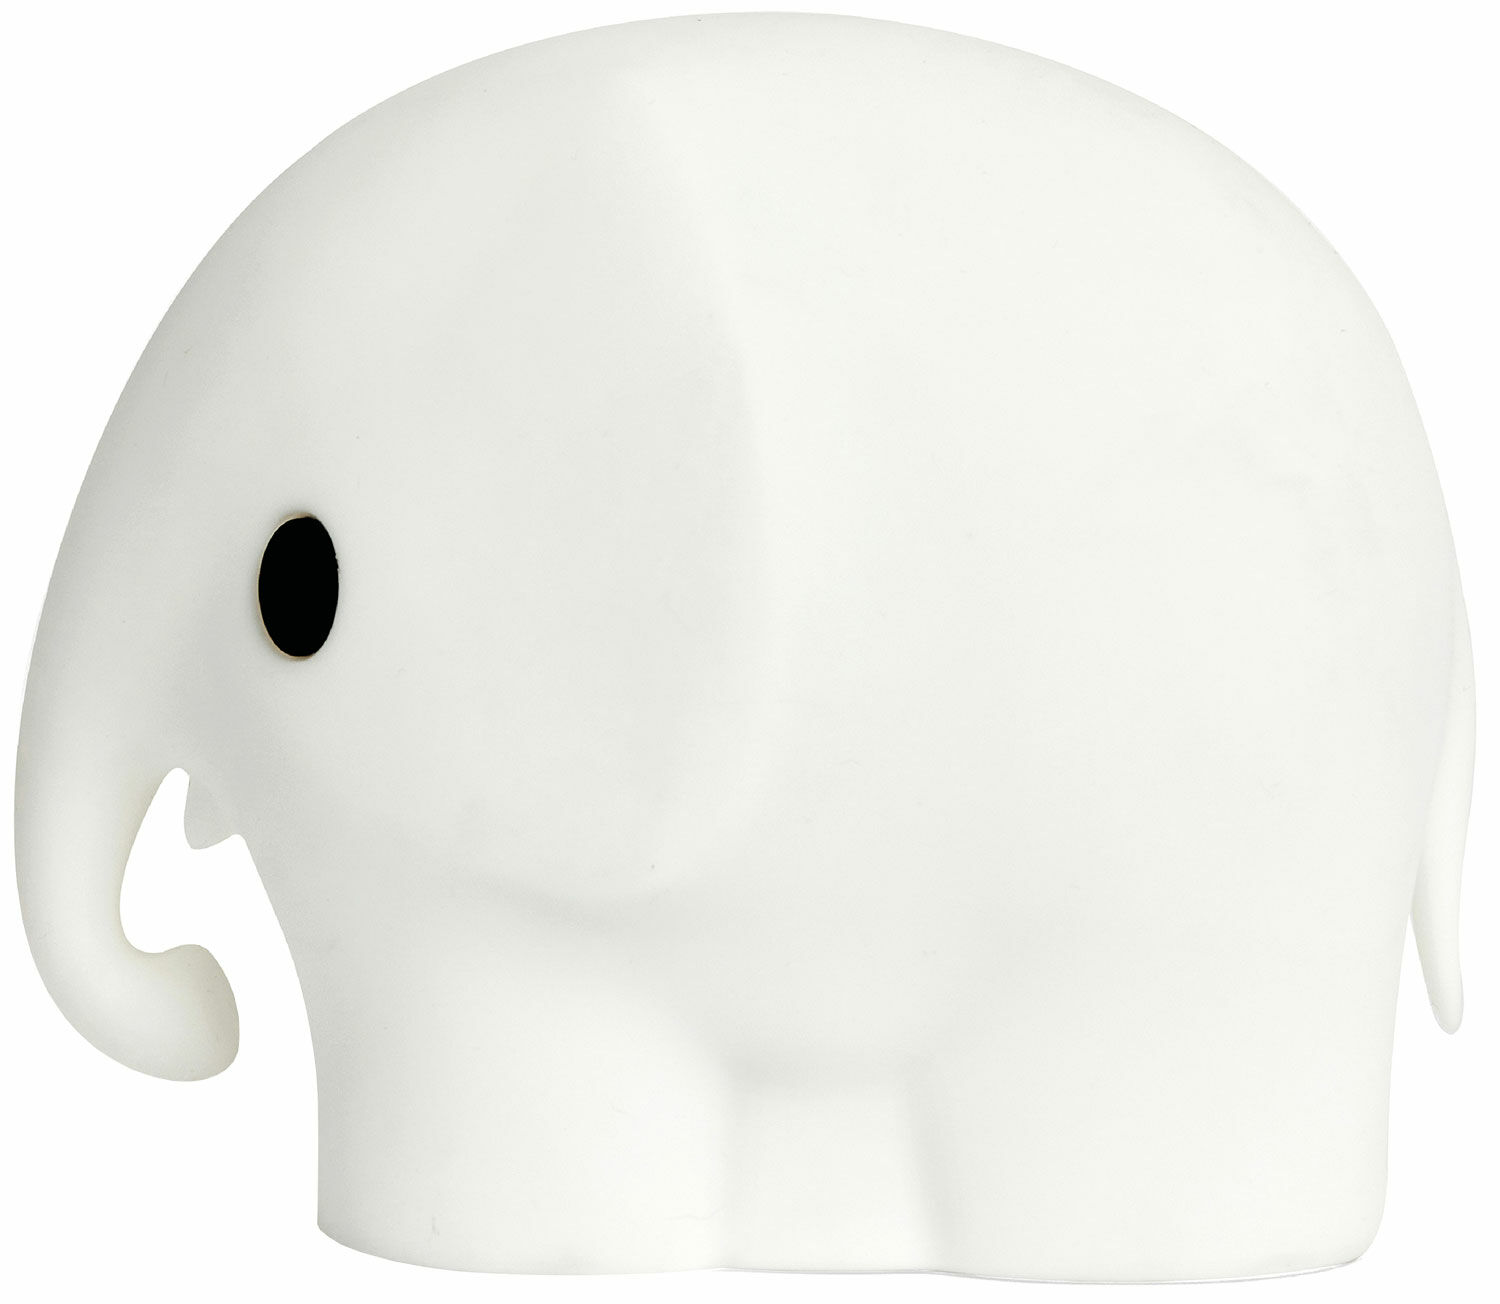 Cordless LED night light "Elephant", dimmable by Mr. Maria